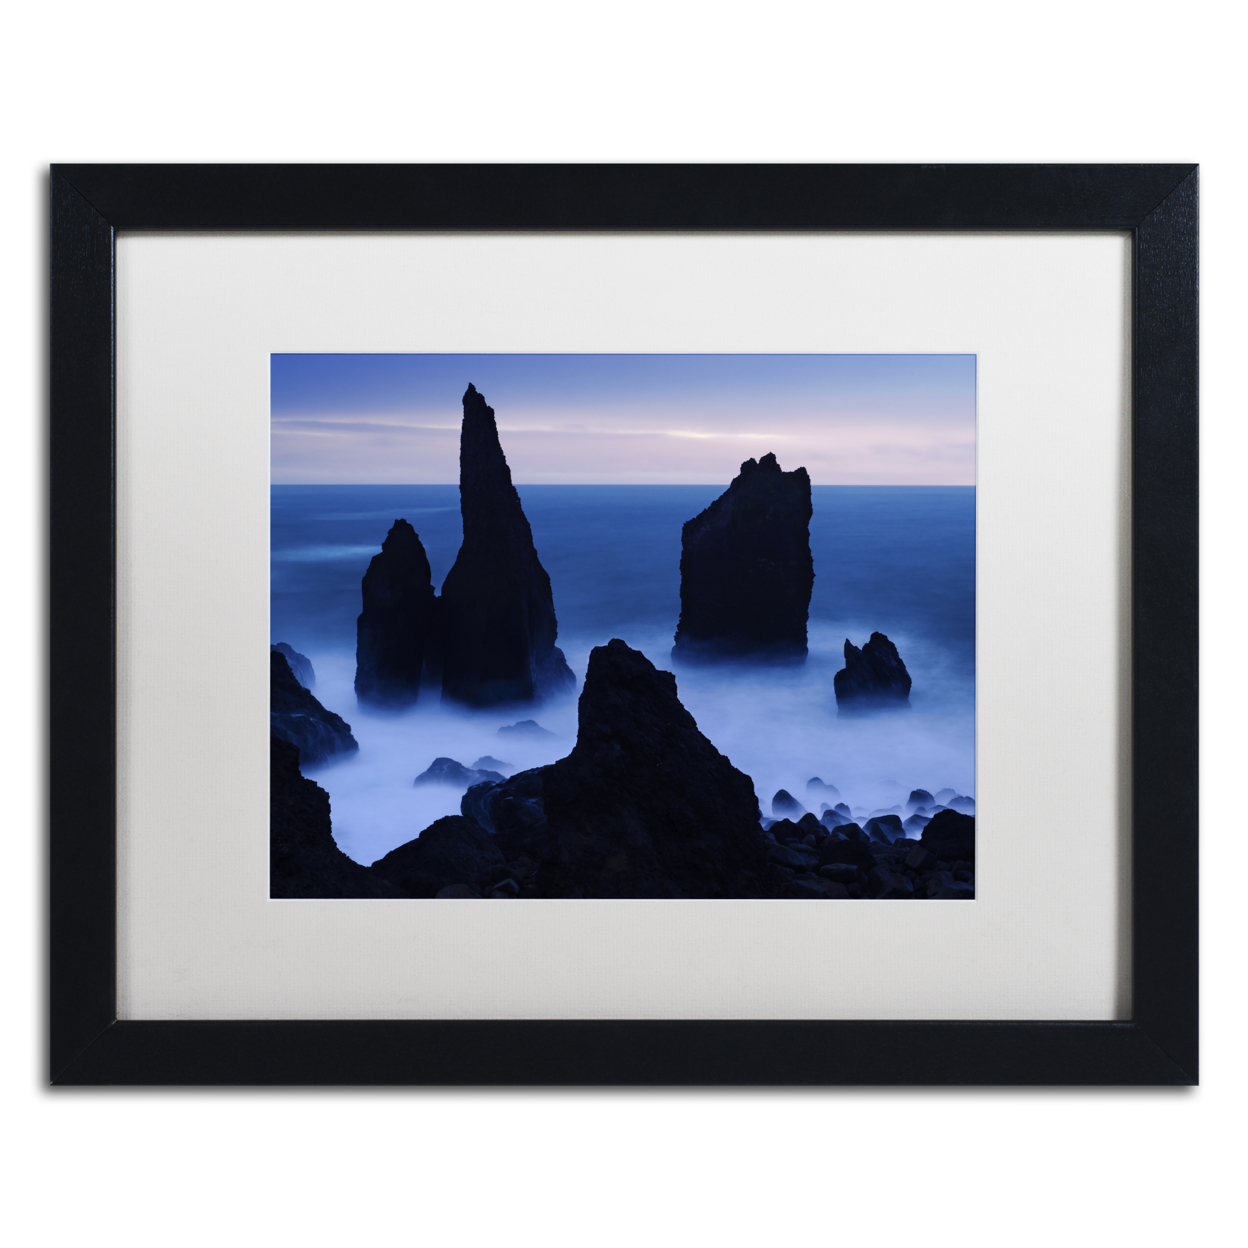 Michael Blanchette Photography 'The Test Of Time' Black Wooden Framed Art 18 X 22 Inches